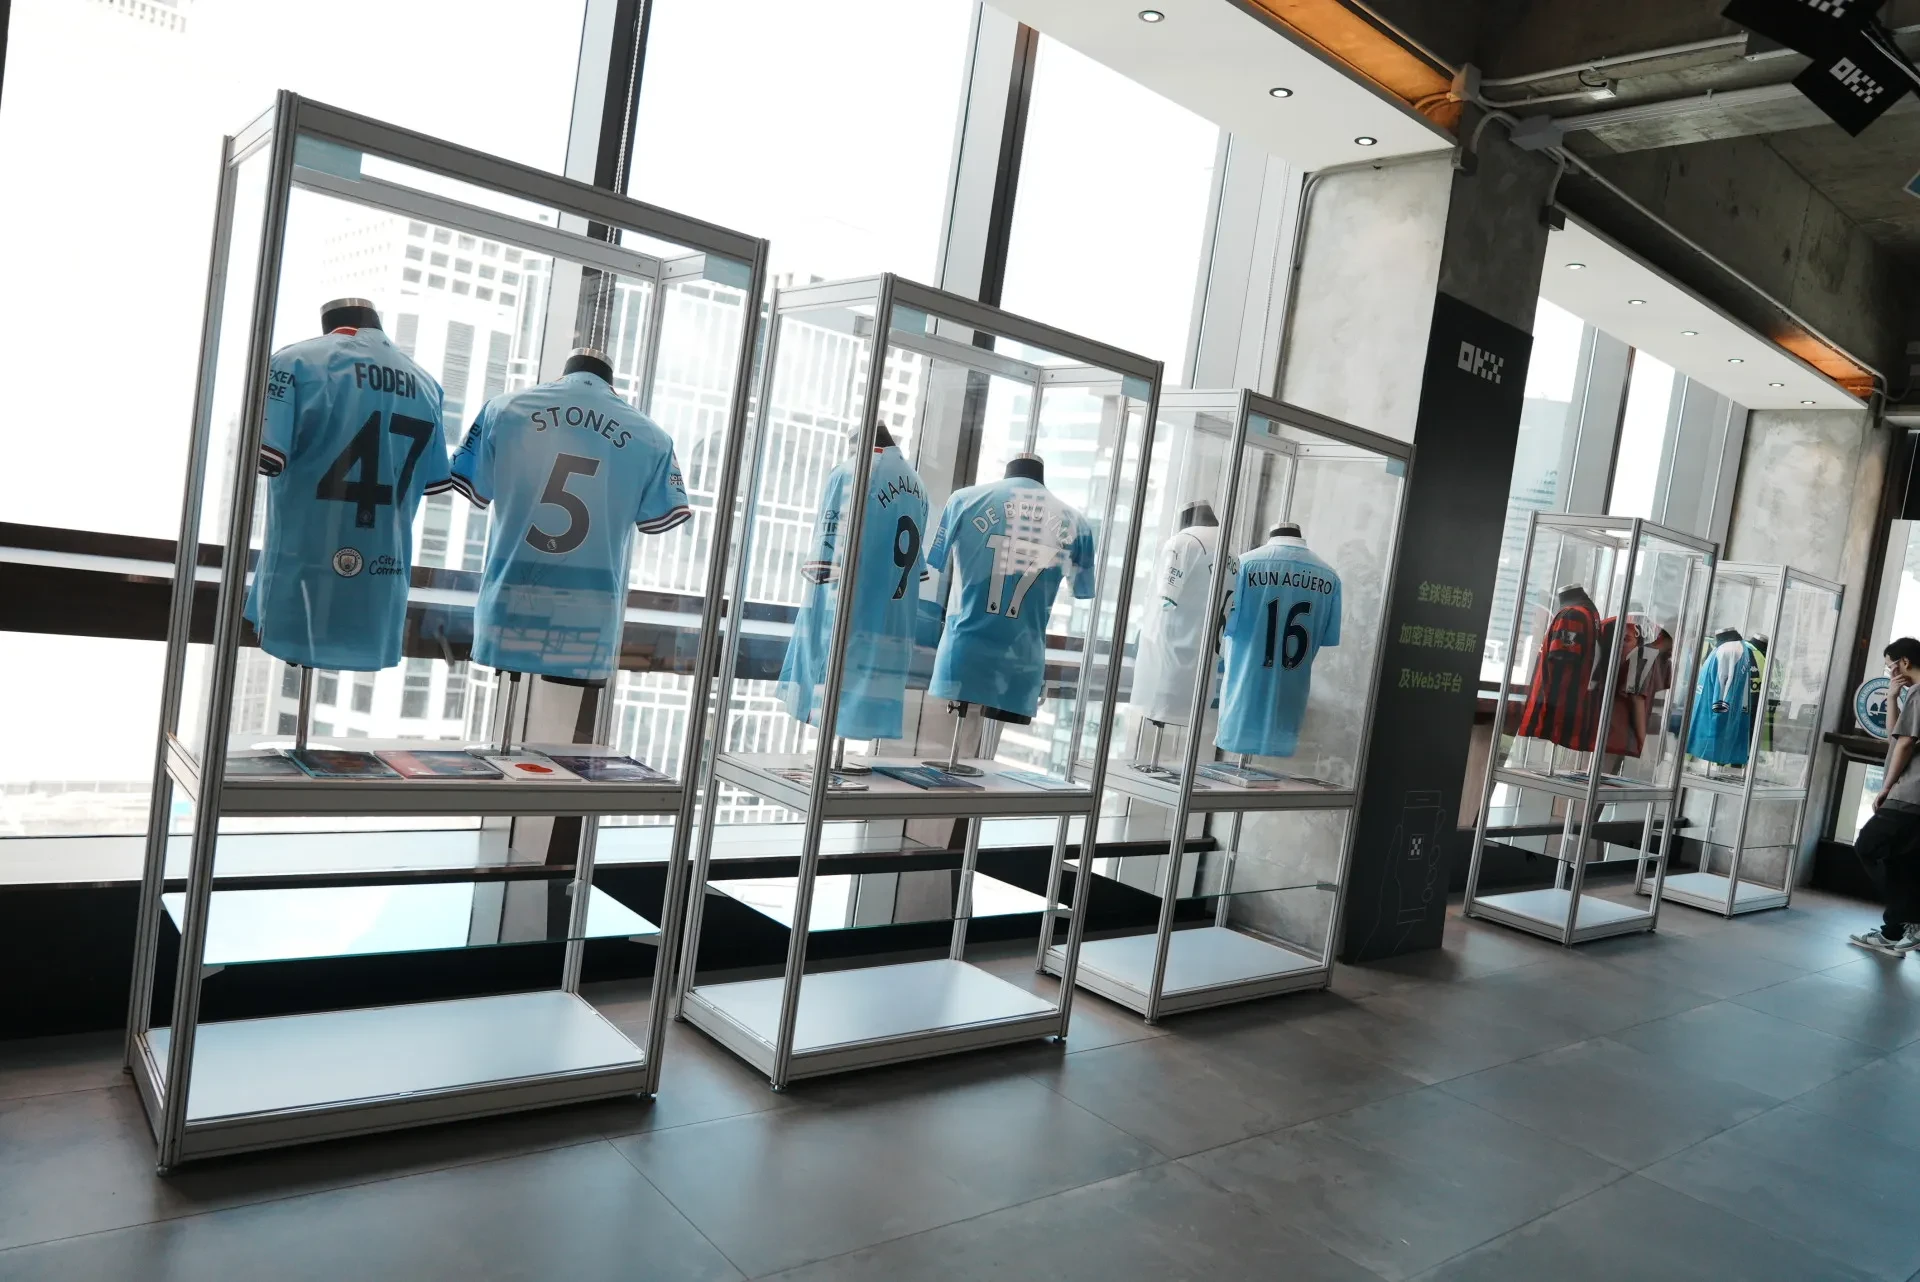 Manchester City-themed collectibles shared by Aries Au, Chairman of the Manchester City Official Supporters Club in Hong Kong